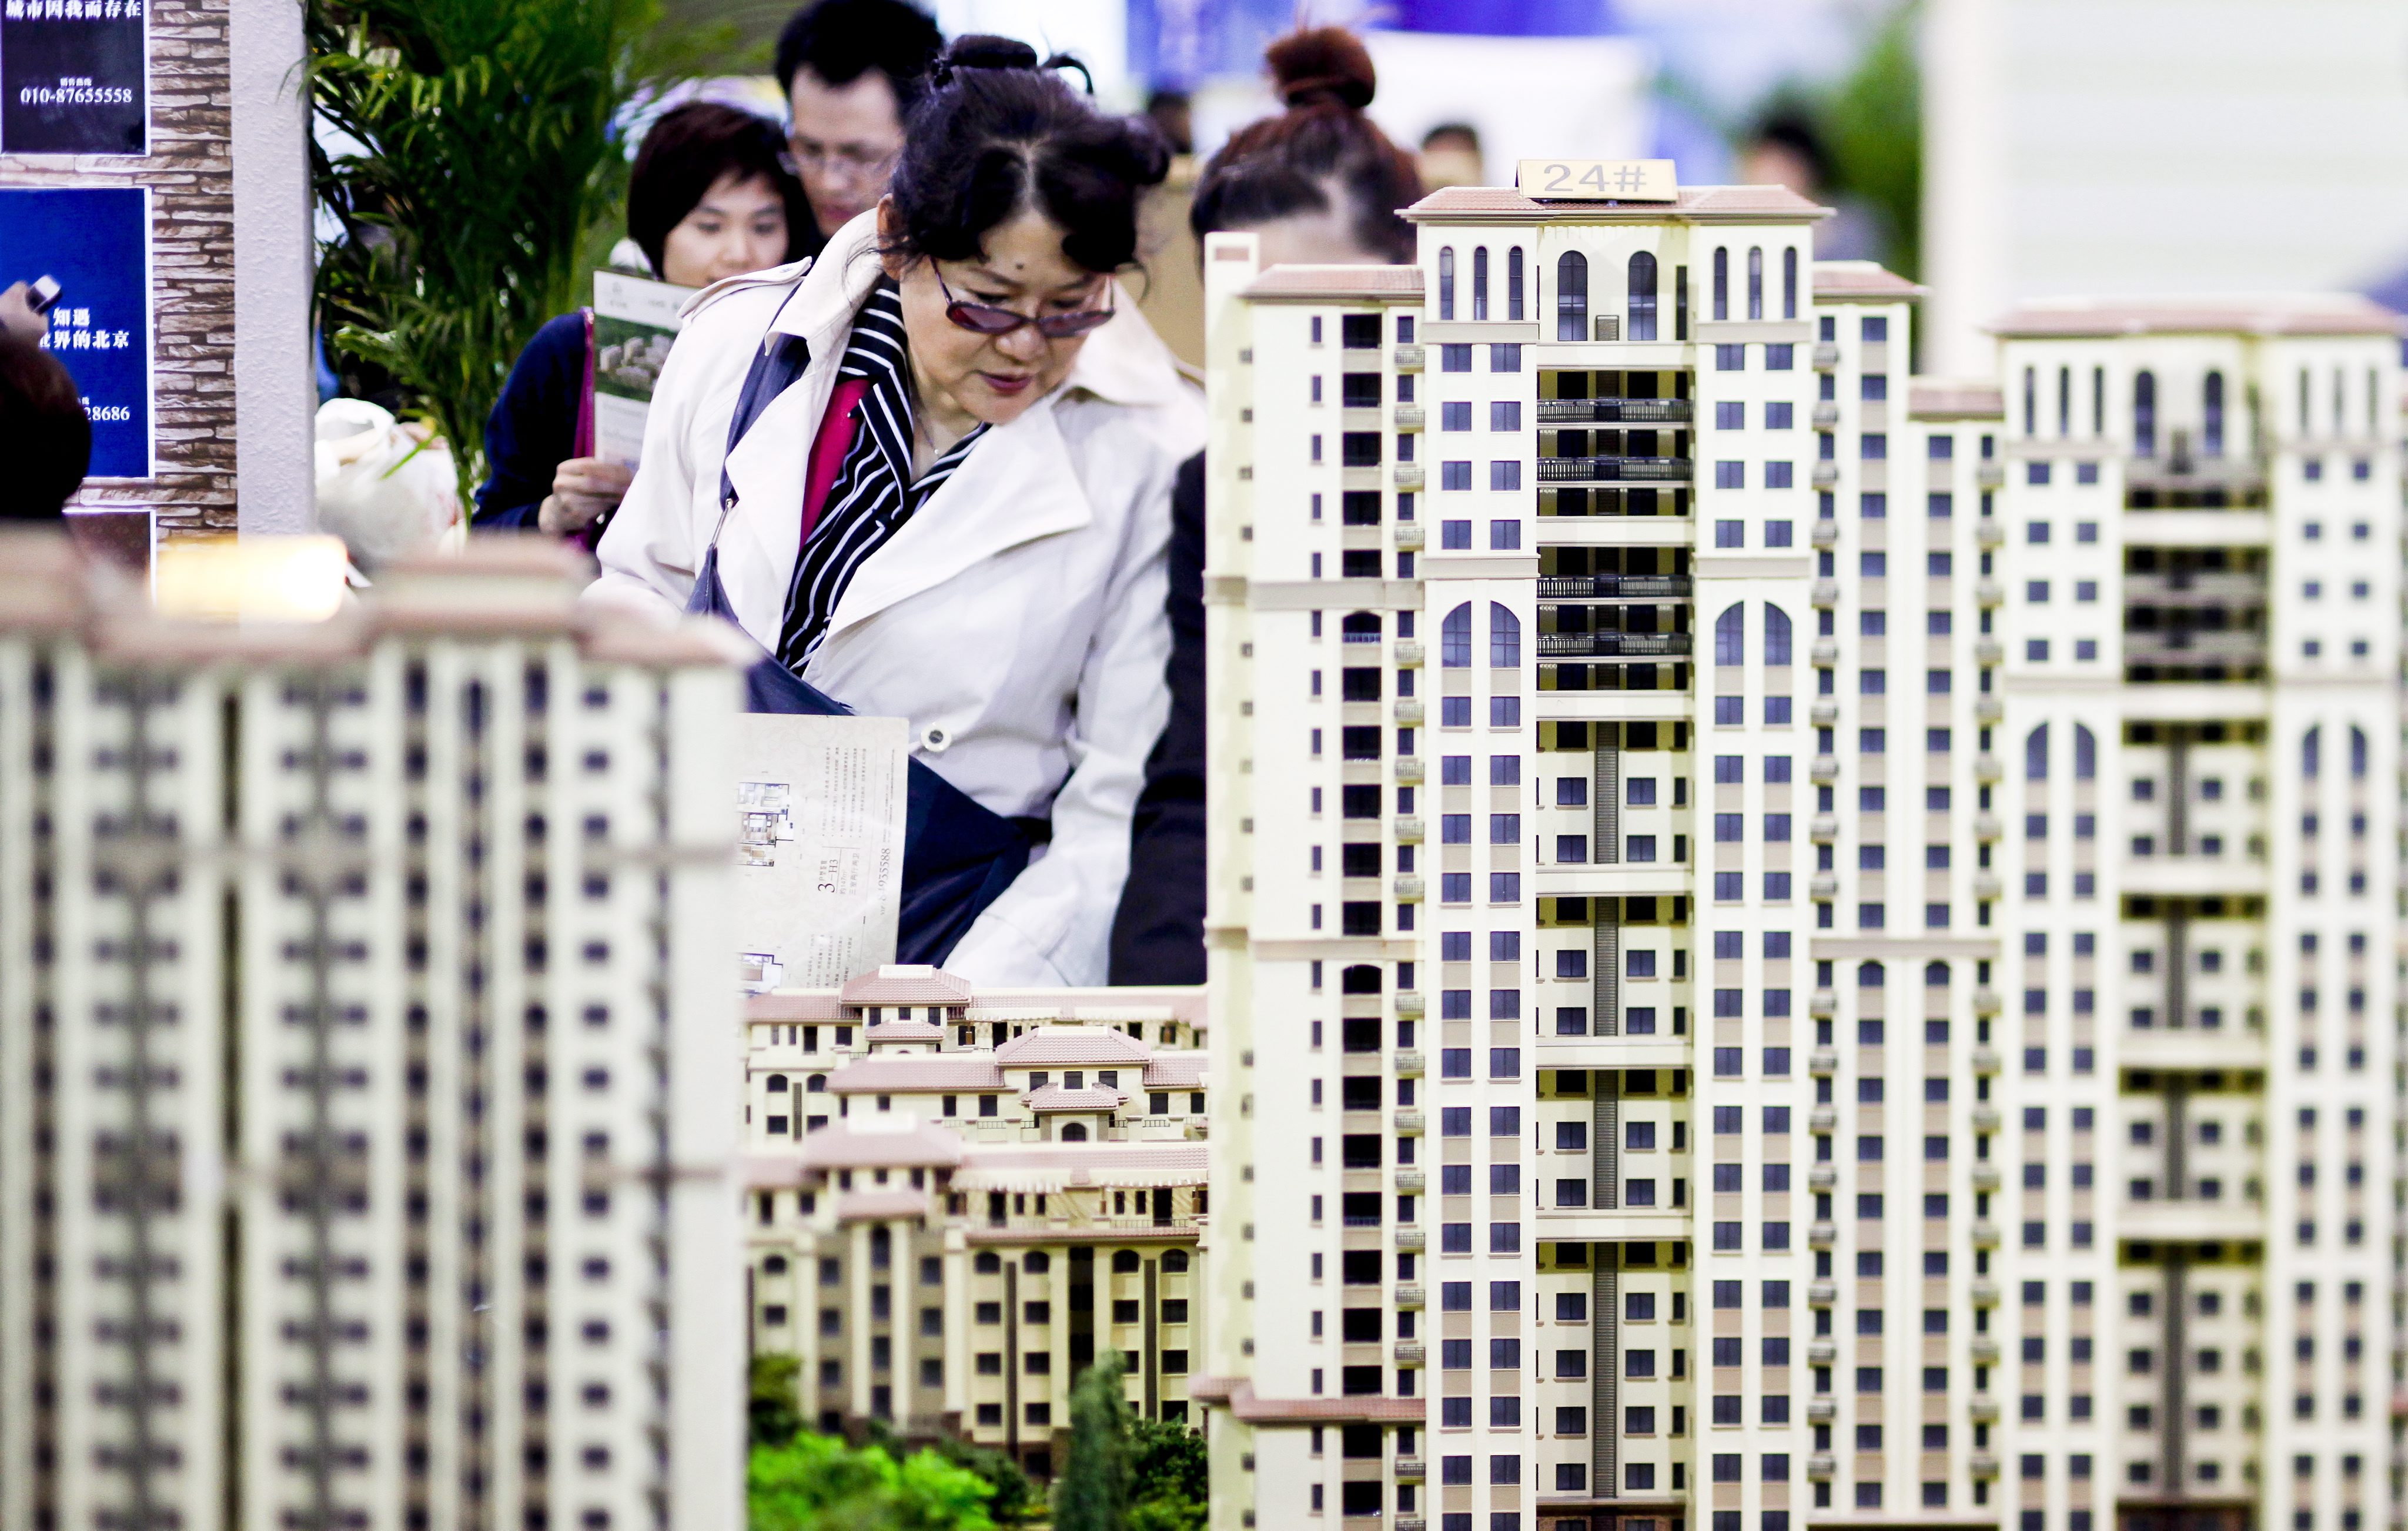 epa03172257 A picture taken with a tilt-shift lens shows people looking at models of new residential developments for sale at a real estate fair in Beijing, China, 05 April 2012. Chinese Premier Wen Jiabao said 02 April that the government will continue to enforce restrictions on the country's property market, as home prices are still far from a reasonable level. China's home property prices in March fell 0.3 percent compared to February, according to market data. EPA/DIEGO AZUBEL